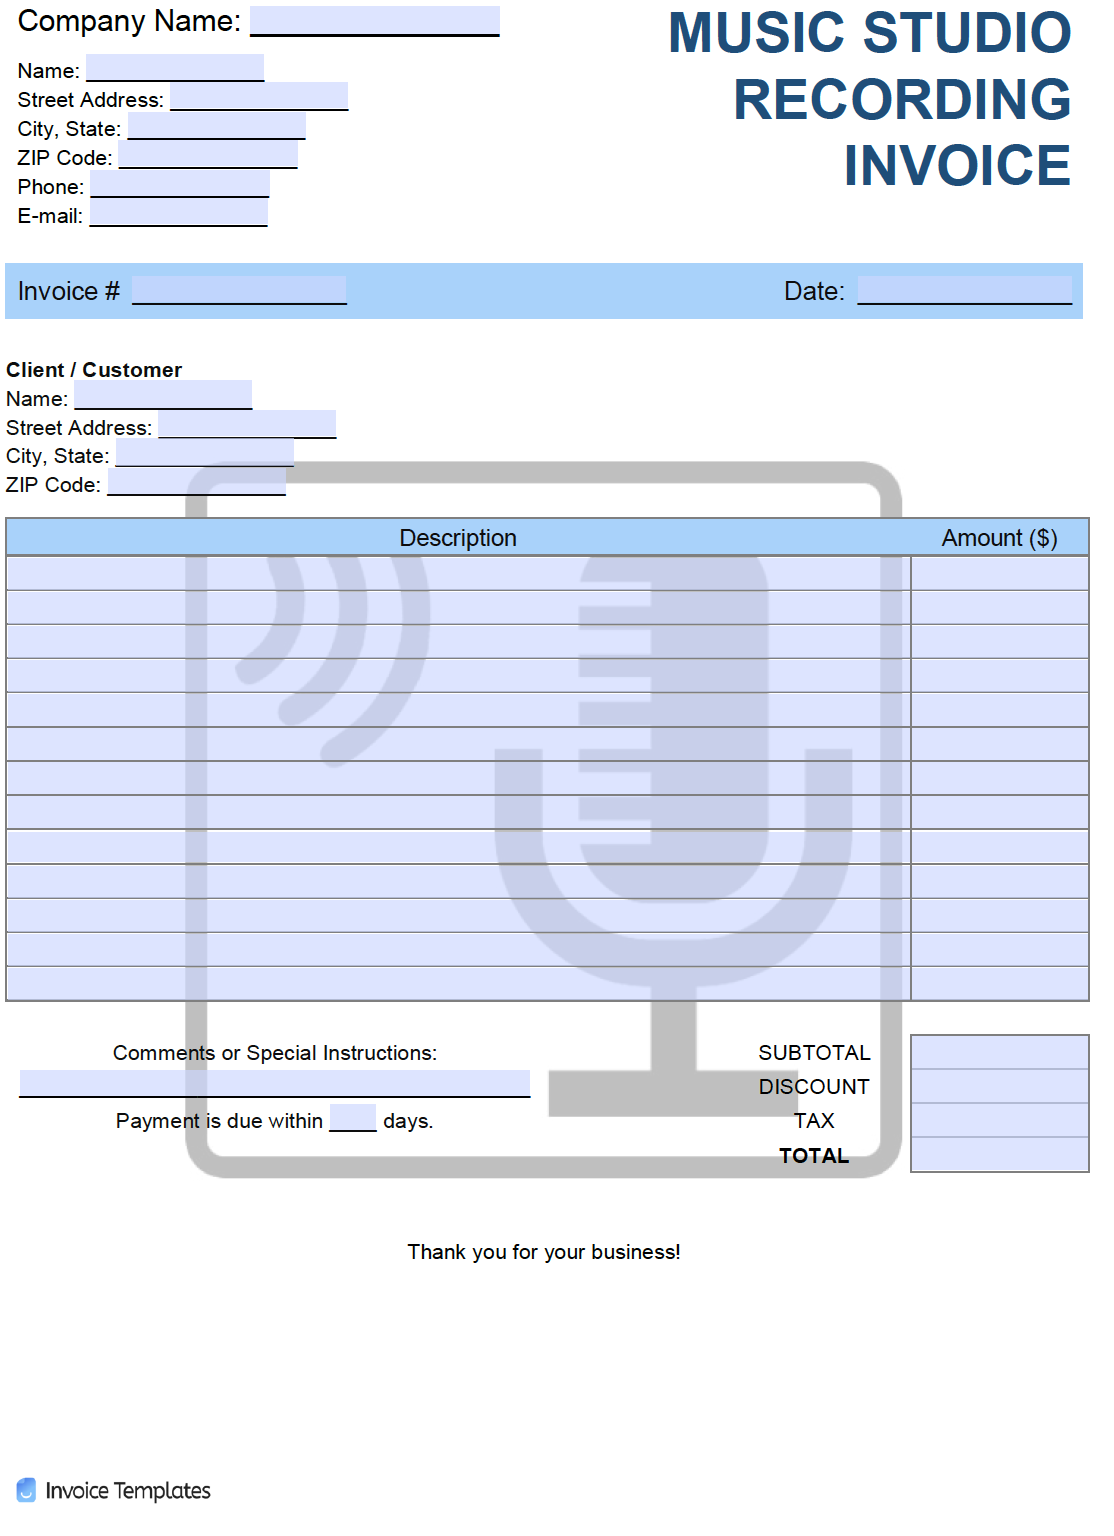 Free Music Recording Studio Invoice Template  PDF  WORD  EXCEL Pertaining To Invoice Register Template